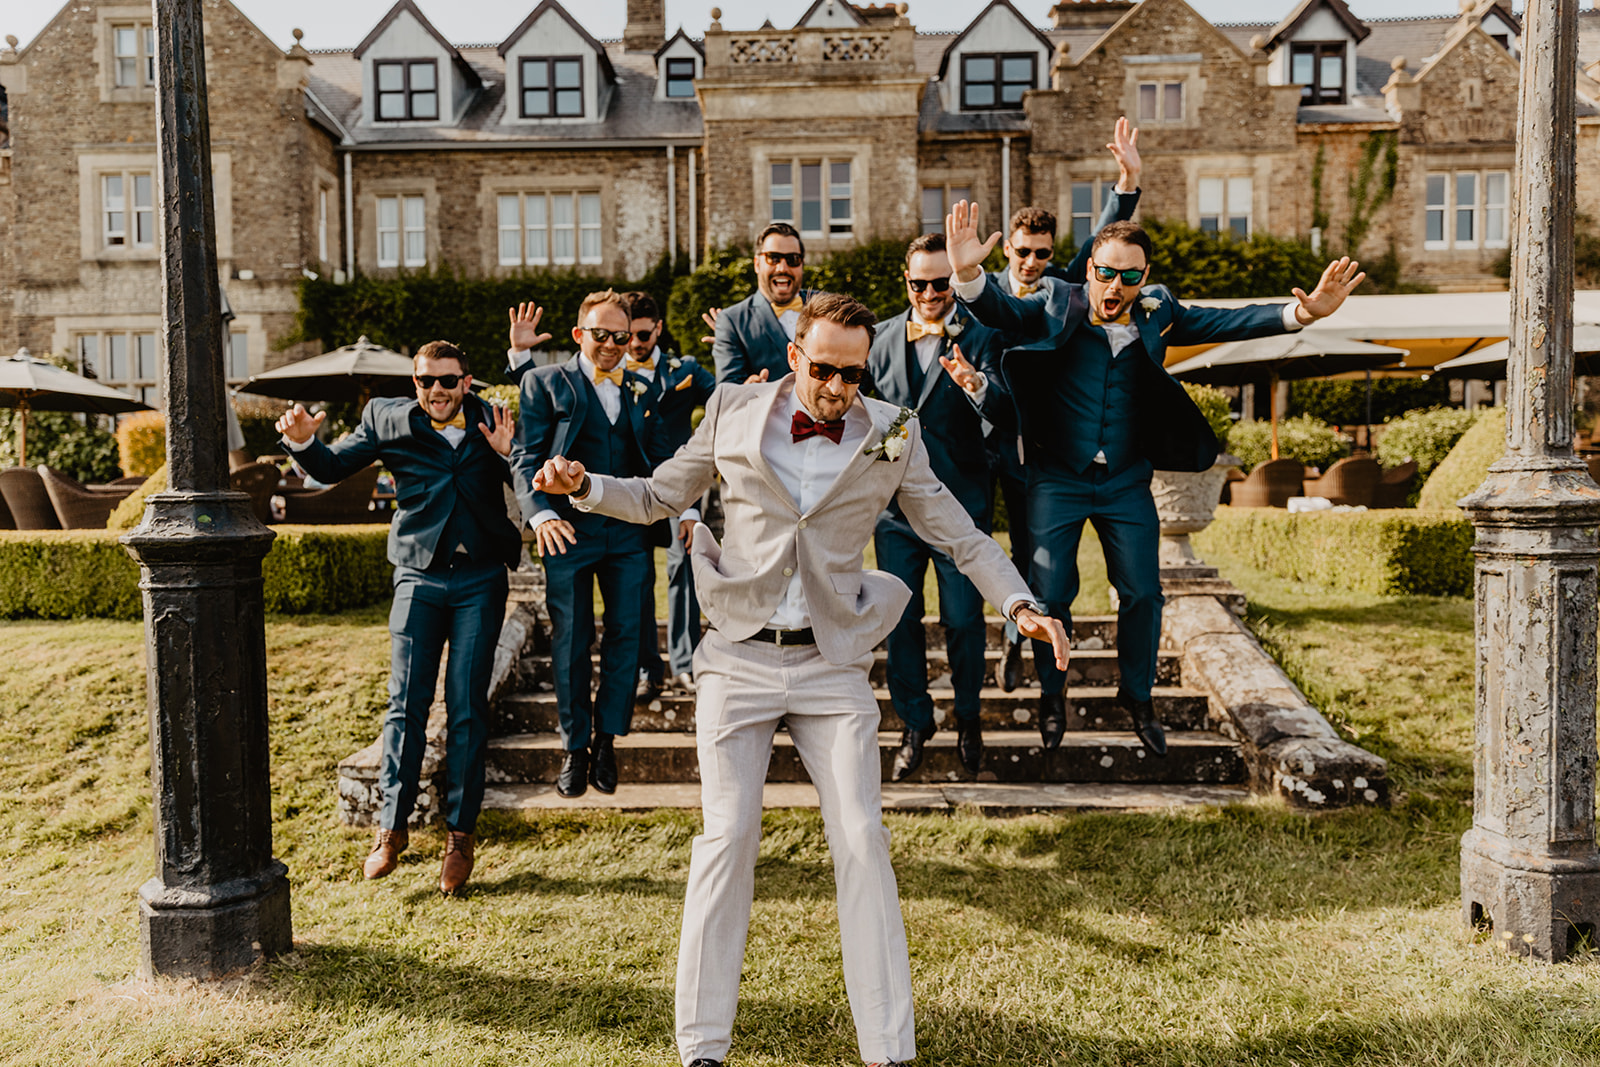 Groom jumps in front of bridal party at a South Lodge, Sussex Wedding. By Olive Joy Photography